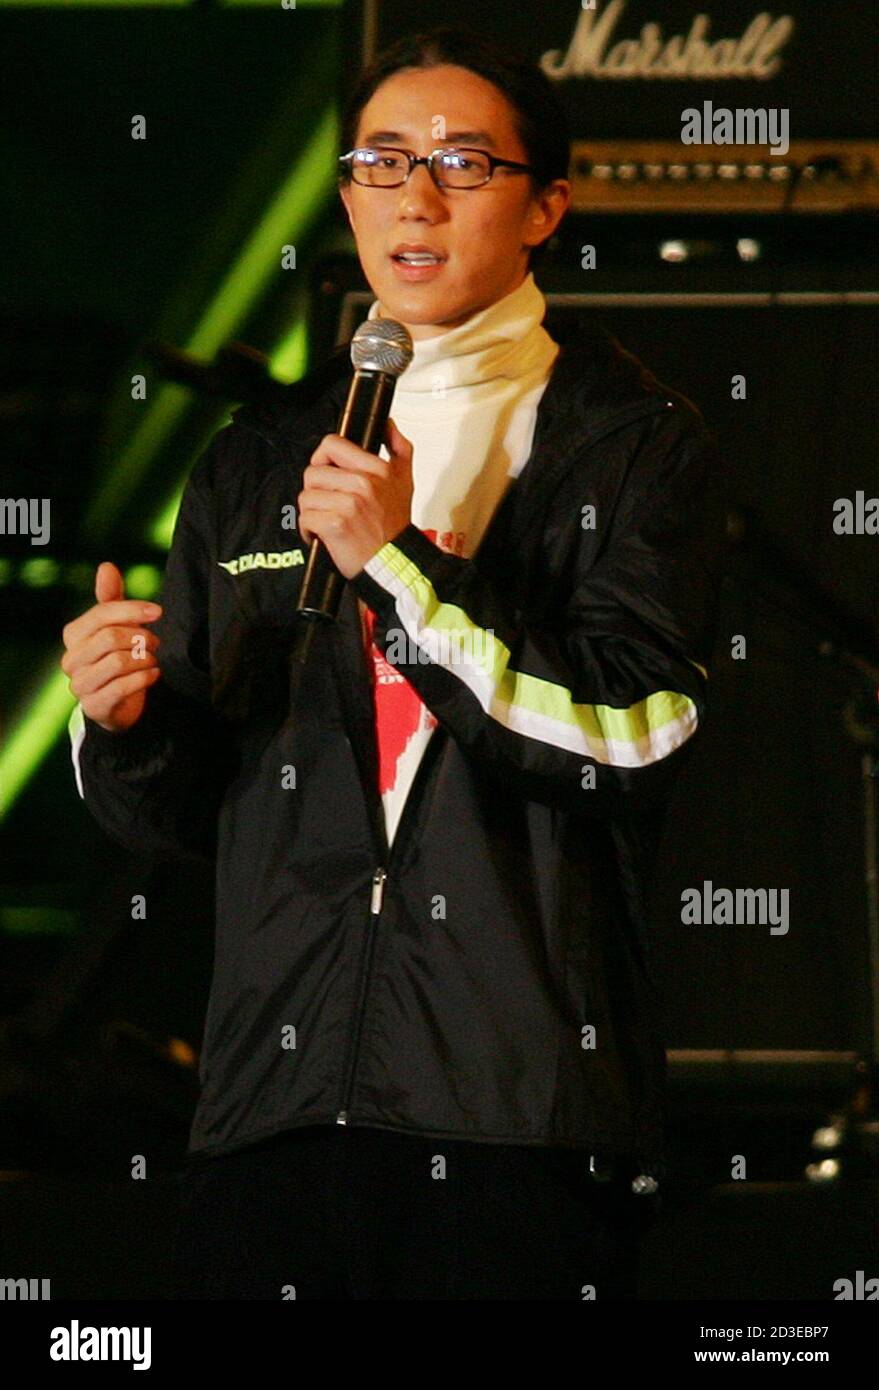 Jaycee Fong, son of Hong Kong action movie star Jackie Chan, attends a charity concert in Hong Kong January 7, 2005. Some of Asia's biggest names in show business, including action movie star Jackie Chan, kicked off a marathon charity concert in Hong Kong on Friday to raise funds for survivors of the world's deadliest tsunami on record. REUTERS/Bobby Yip  BY/CN Stock Photo